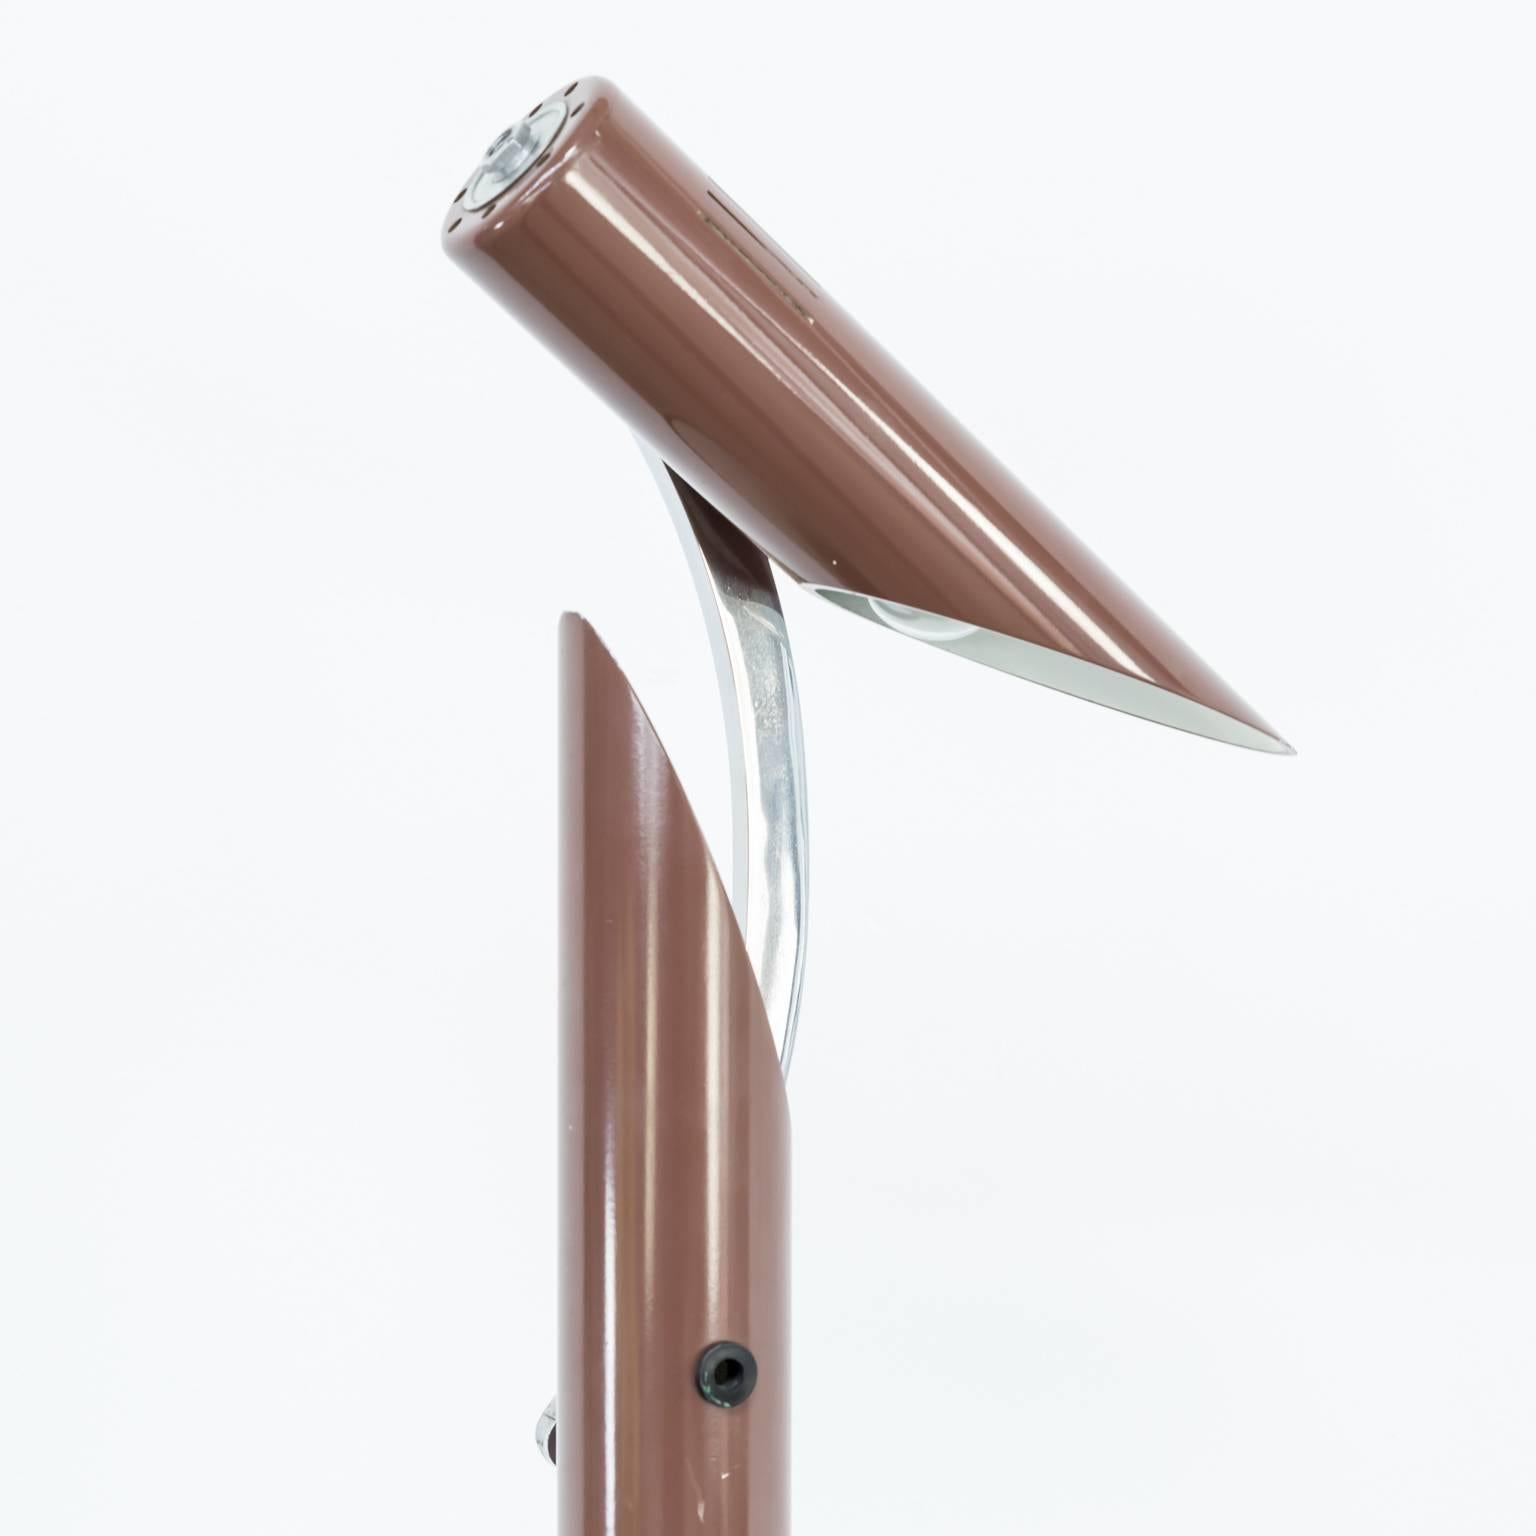 1970s Fase Madrid modernist 'Tharsis' rare floorlamp. Rareness because Tharsis mostly has been sold as desk lamp. This is a 134cm floor lamp marked Fase Madrid. Nice brown lacquered steel and white inner. Good condition, wear consistent with age and